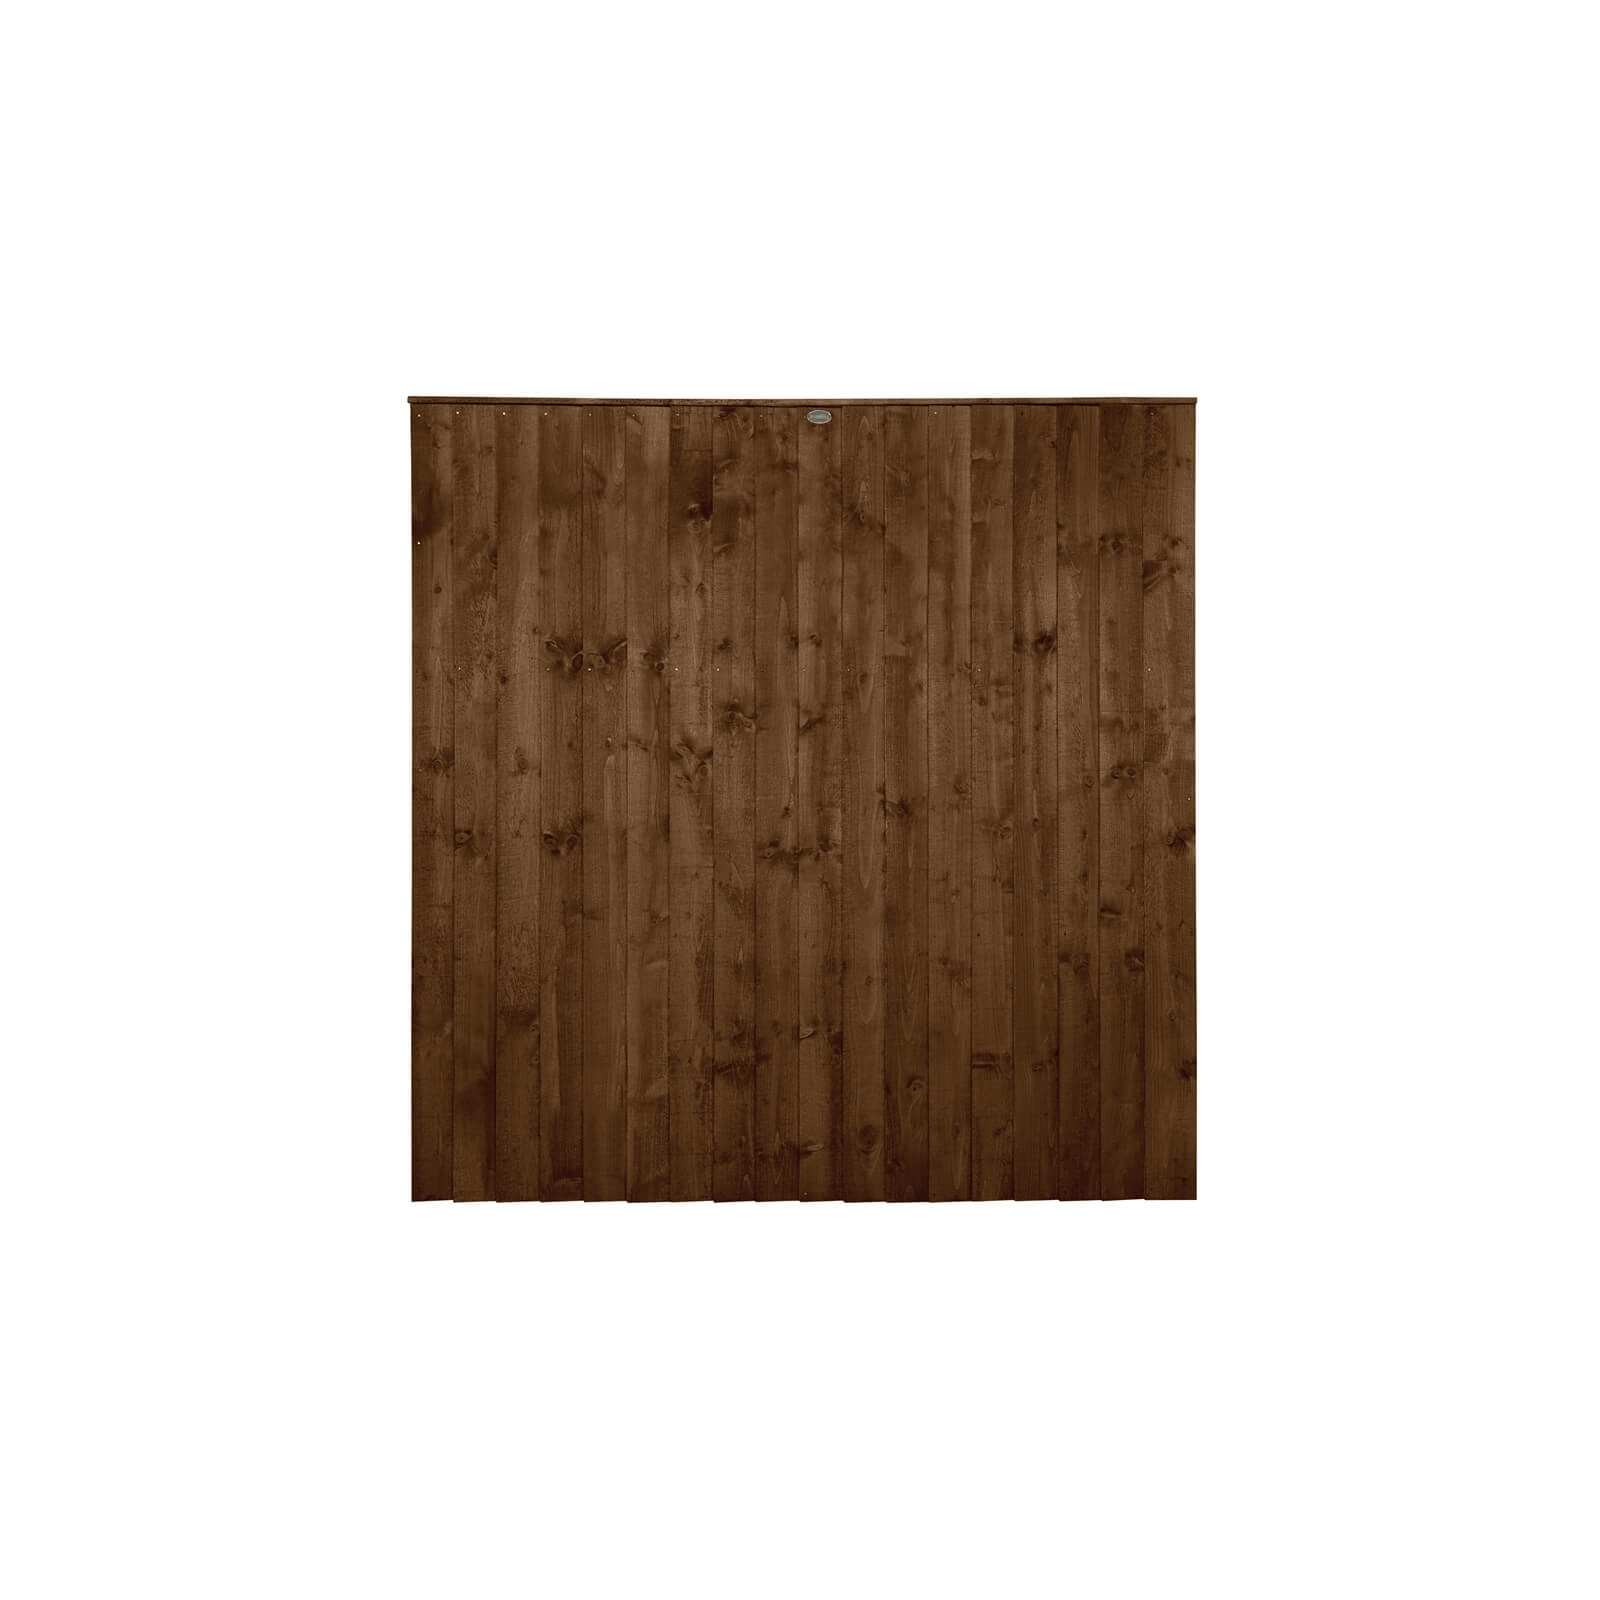 6ft x 6ft (1.83m x 1.85m) Pressure Treated Featheredge Fence Panel (Dark Brown) - Pack of 4